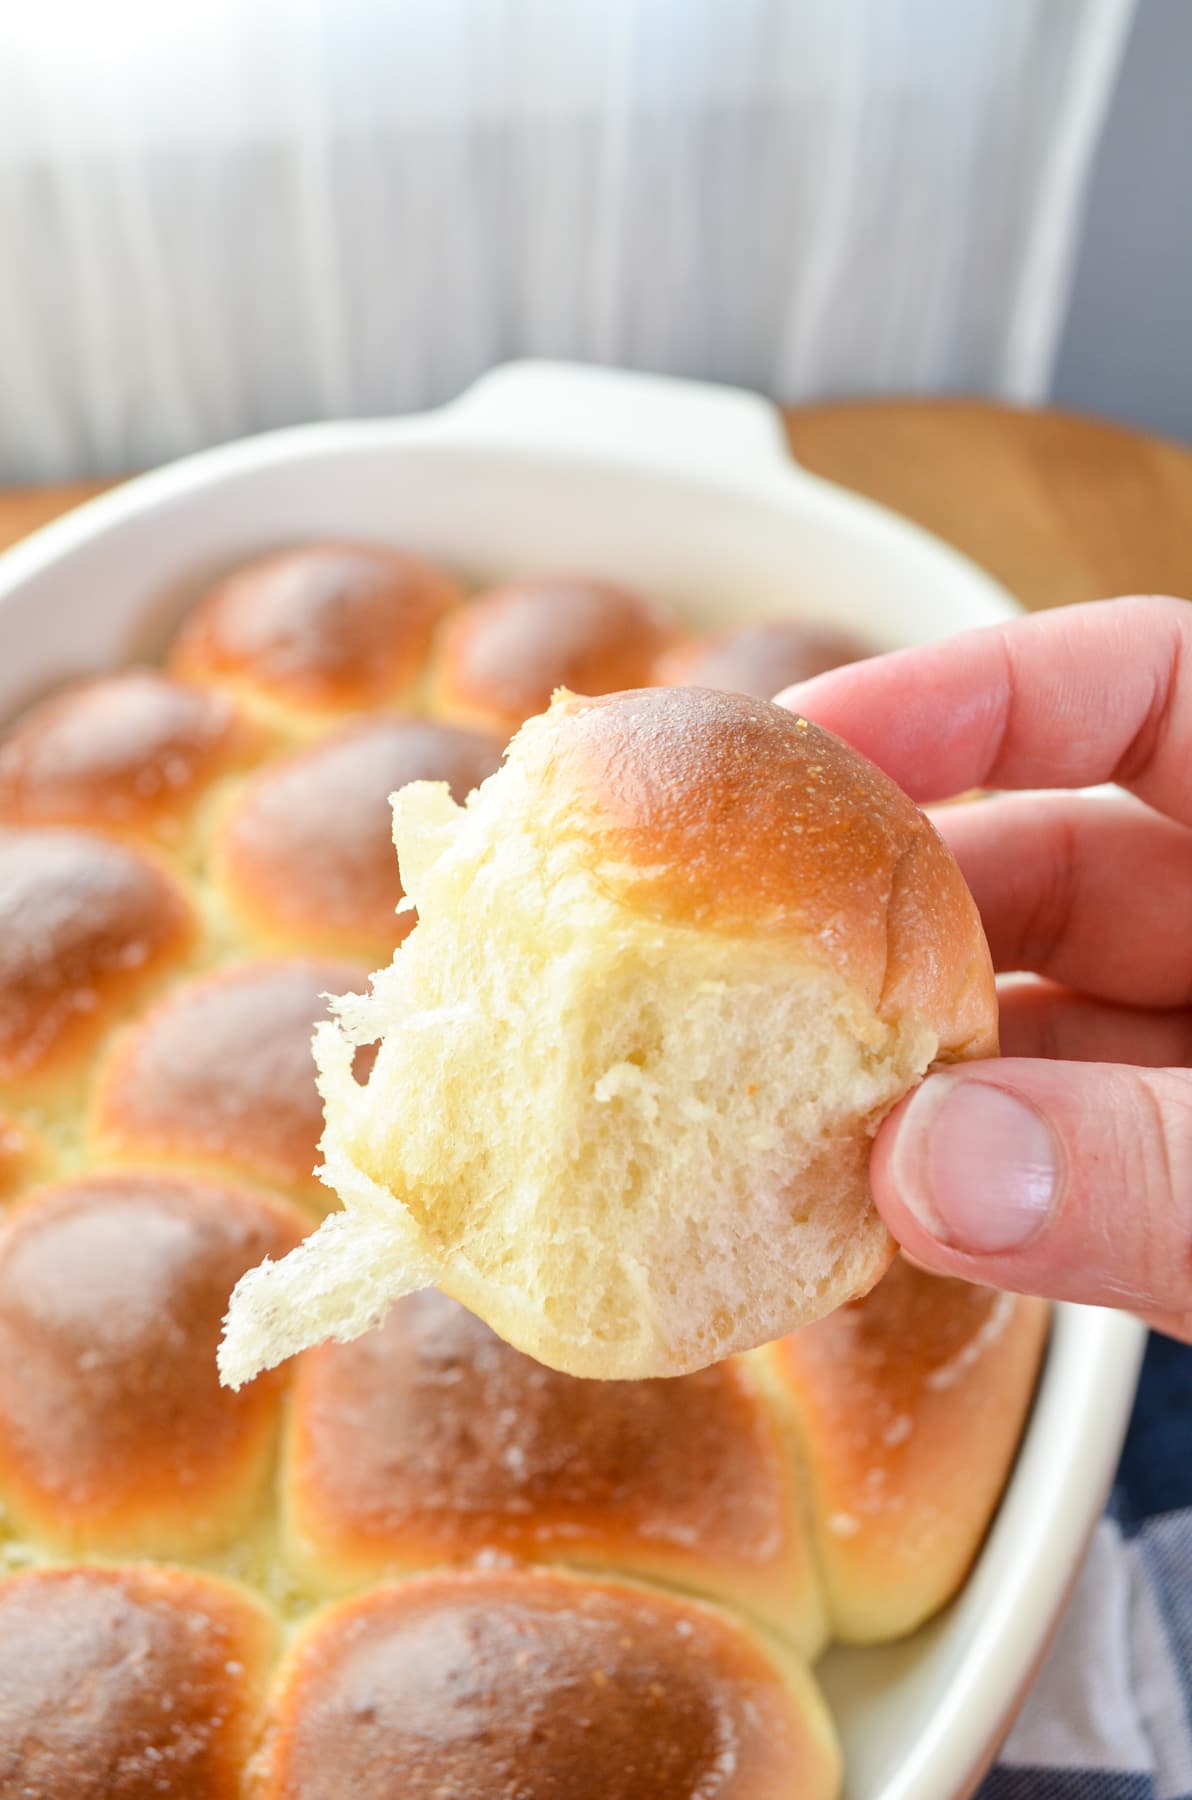 A hand holding a dinner roll from a large baking dish.